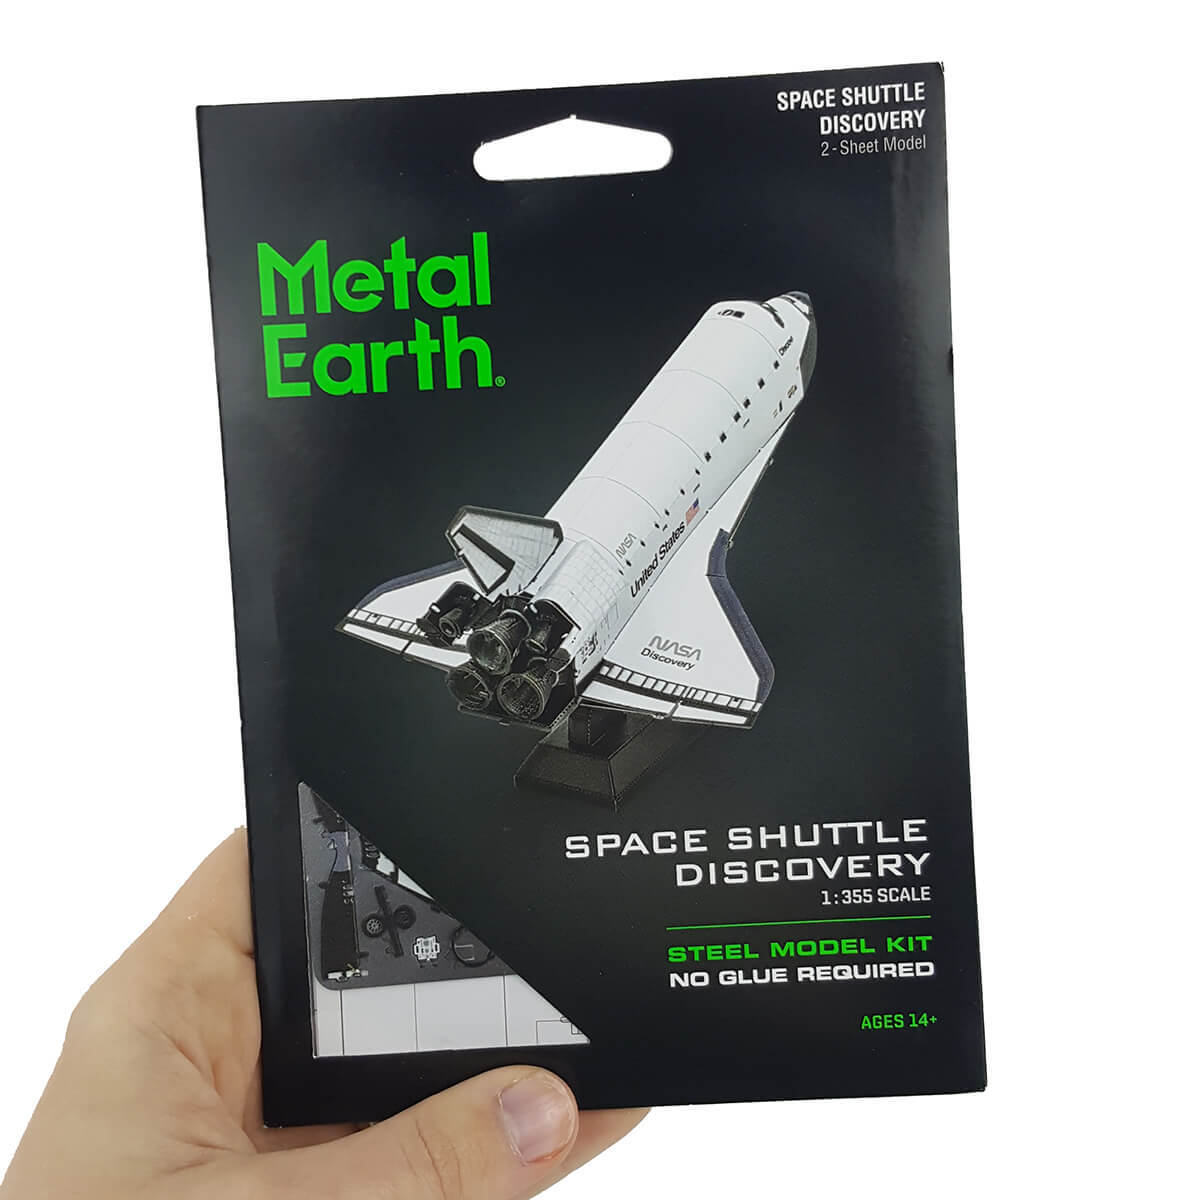 Metal Earth Space Shuttle Discovery NASA Orbiter 1:355 scale 3D Model DIY Kit 